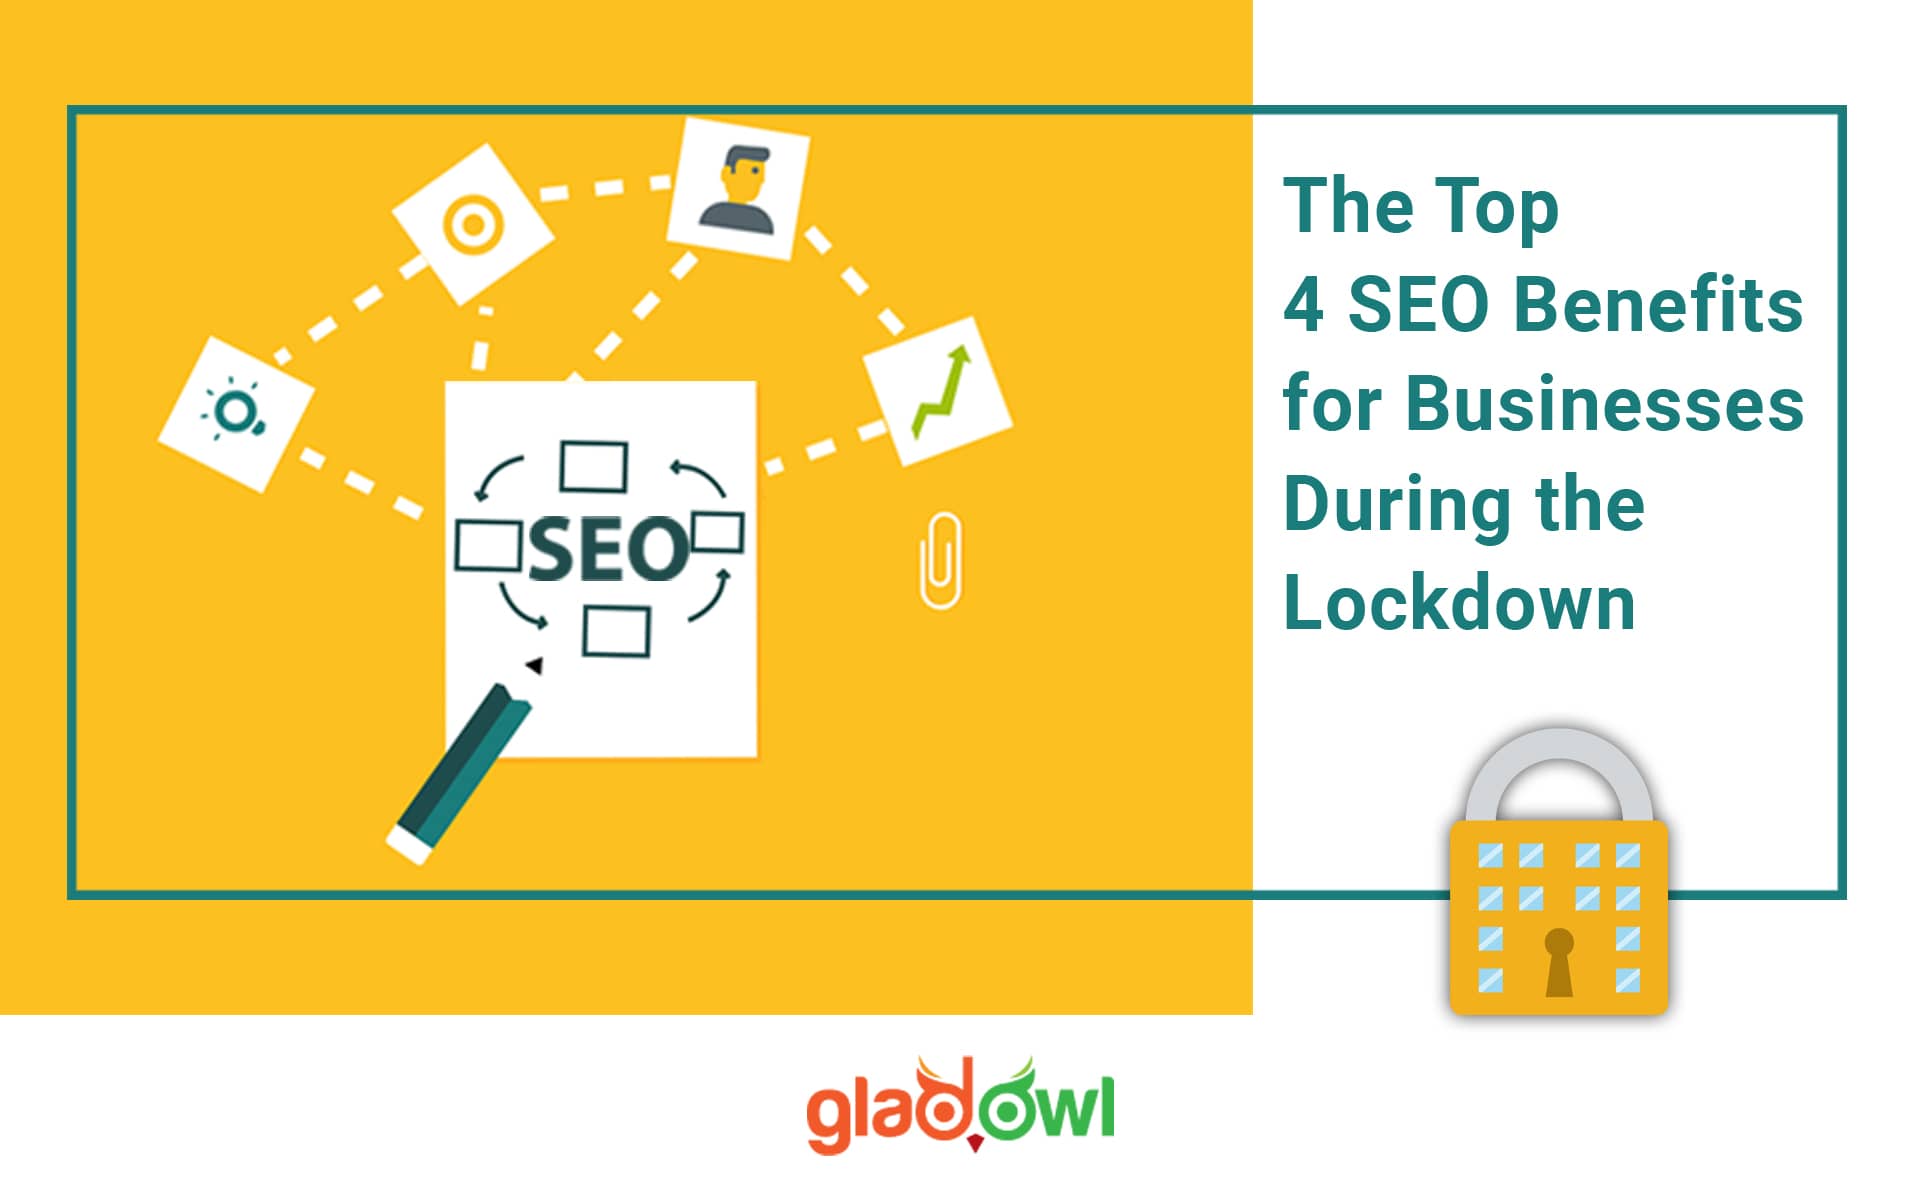 The Top 4 SEO Benefits for Businesses During the Lockdown